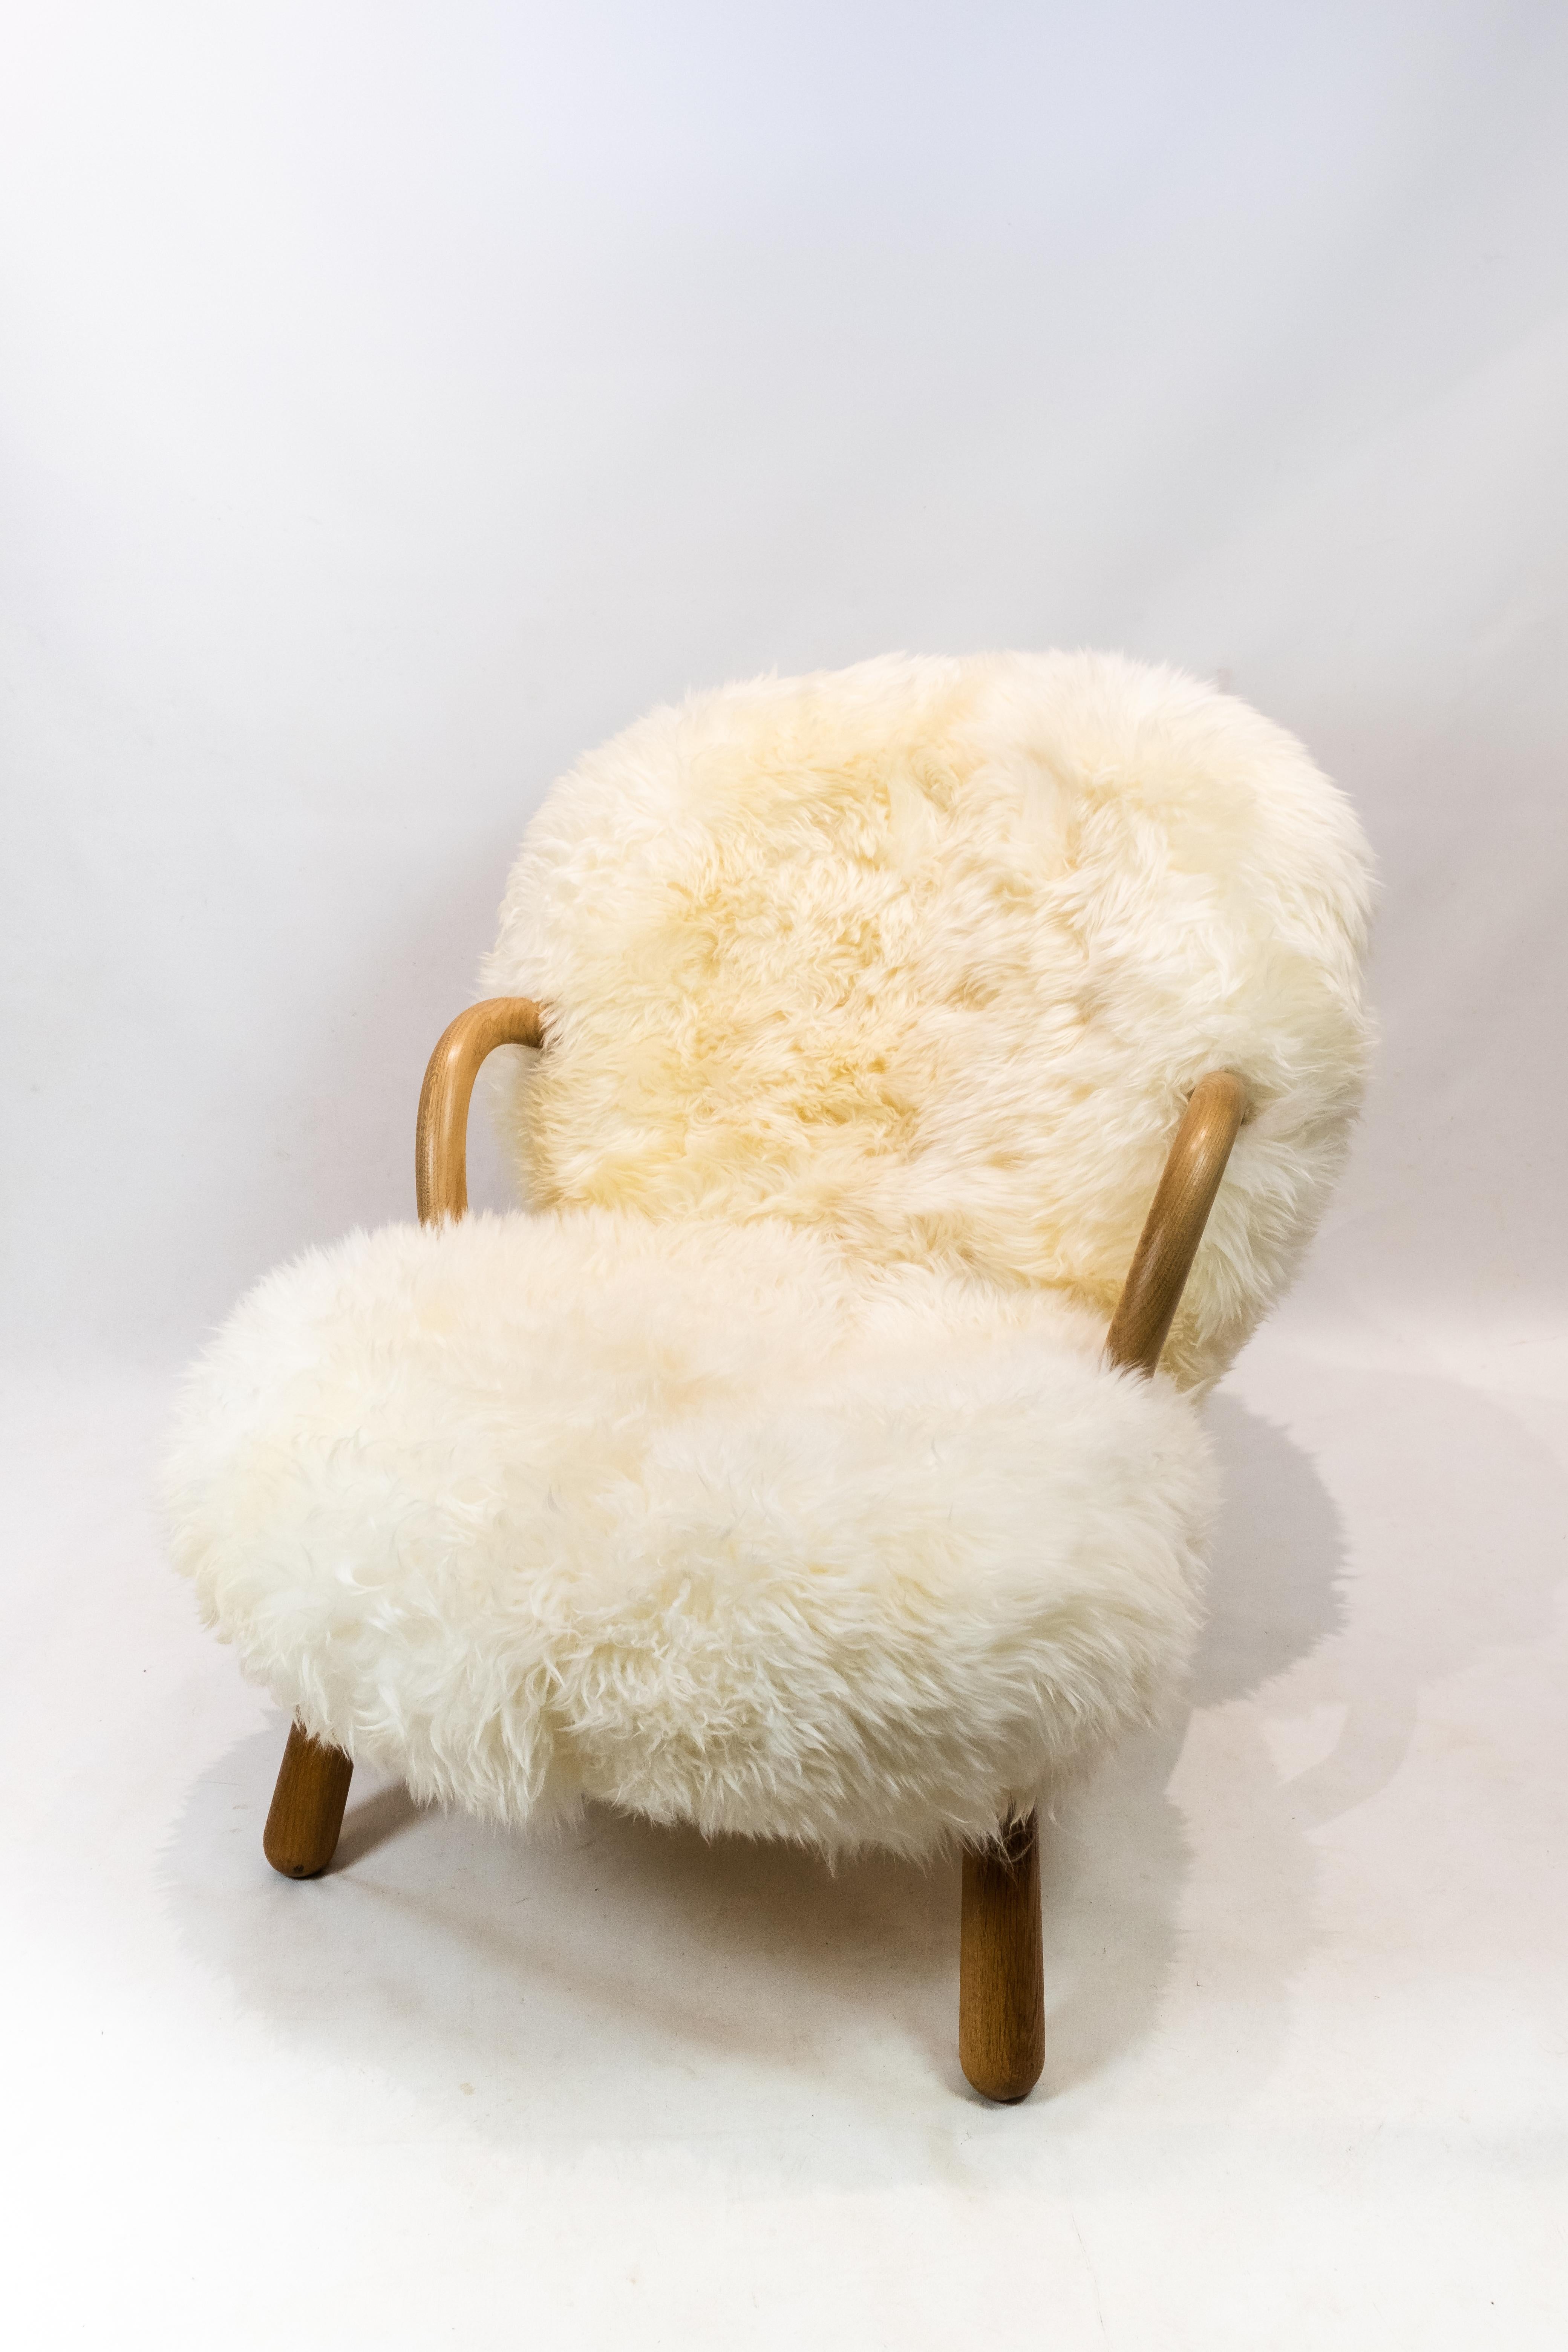 The clam chair originally designed by Phillip Arctander in 1944 and manufactured by Paustian. The chair is upholstered in sheep skin and with arms and legs of oak.